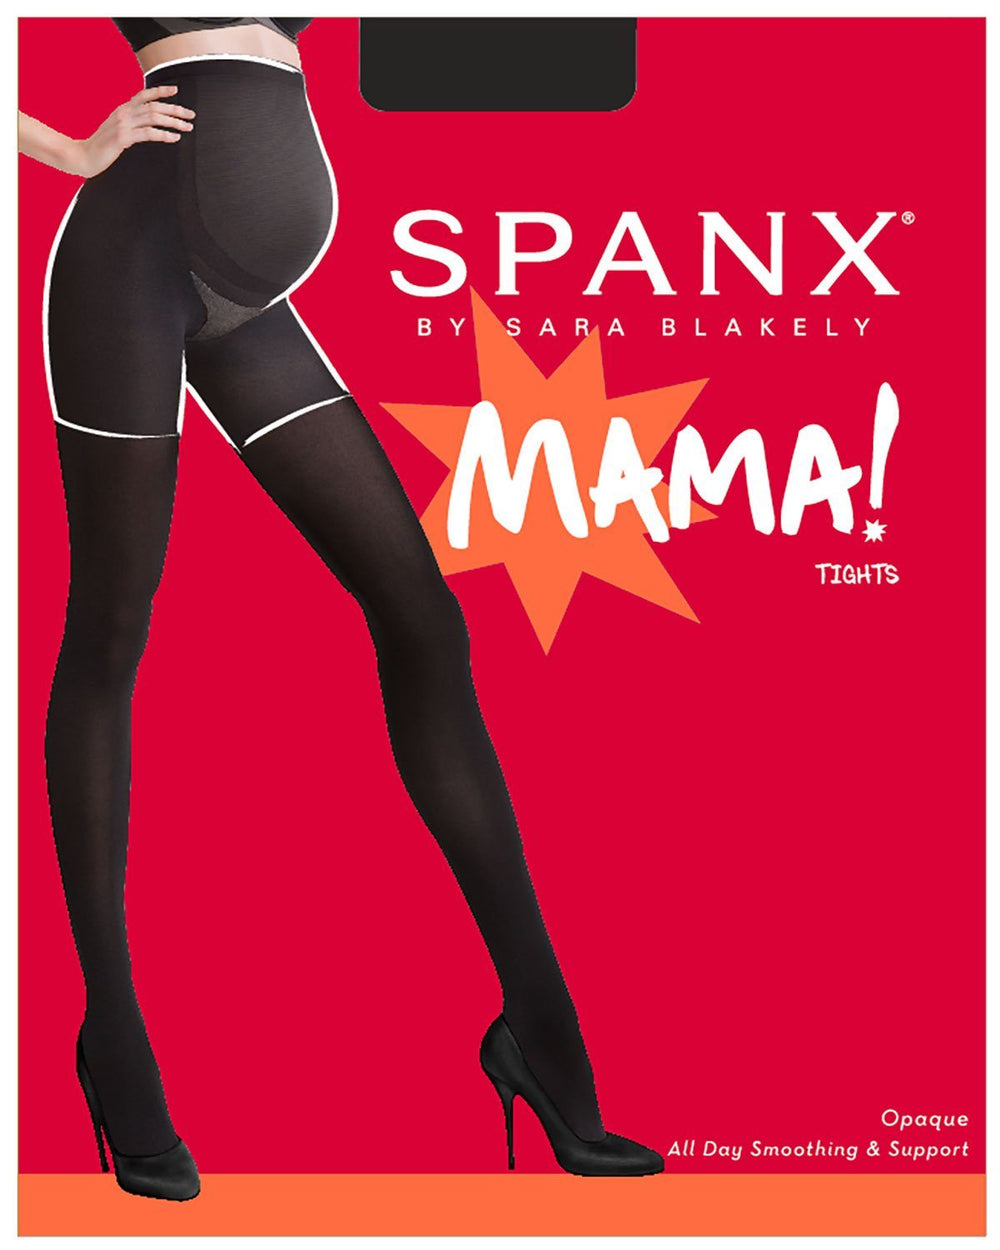 😊$9.99 (Reg $30) SPANX Arm Tights! Deal ends September 24th, at 6 AM PST!  👆 Find the direct link in my bio OR Go to: 👉🏻Tin